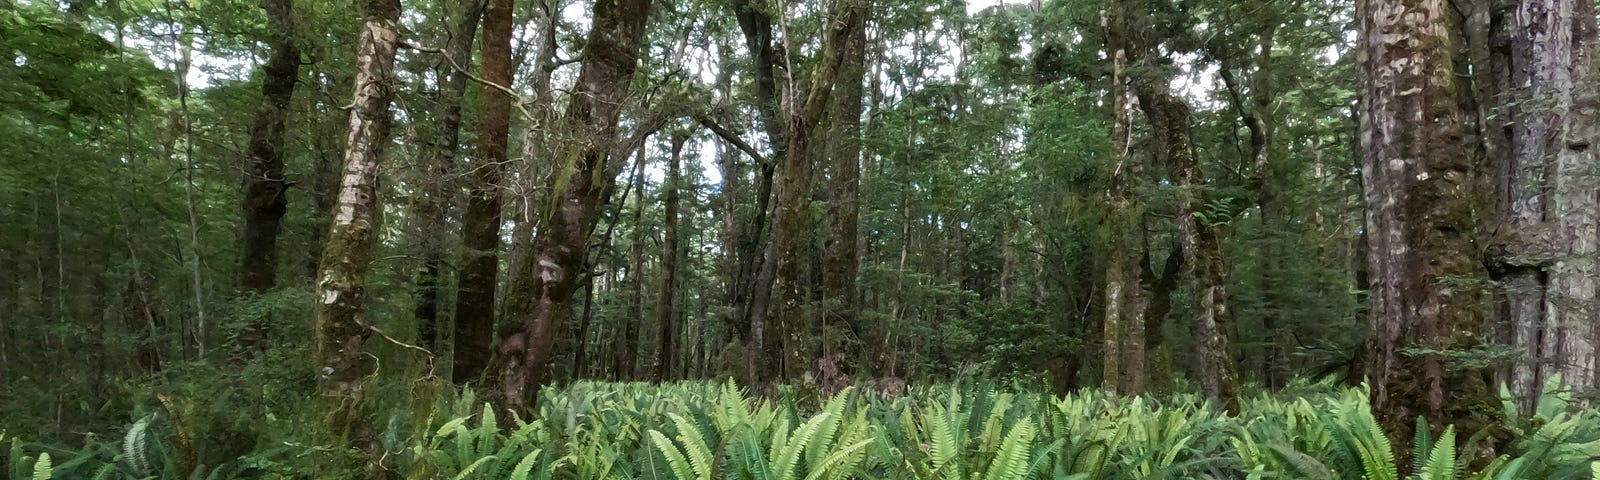 Ferns covering the forest floor.